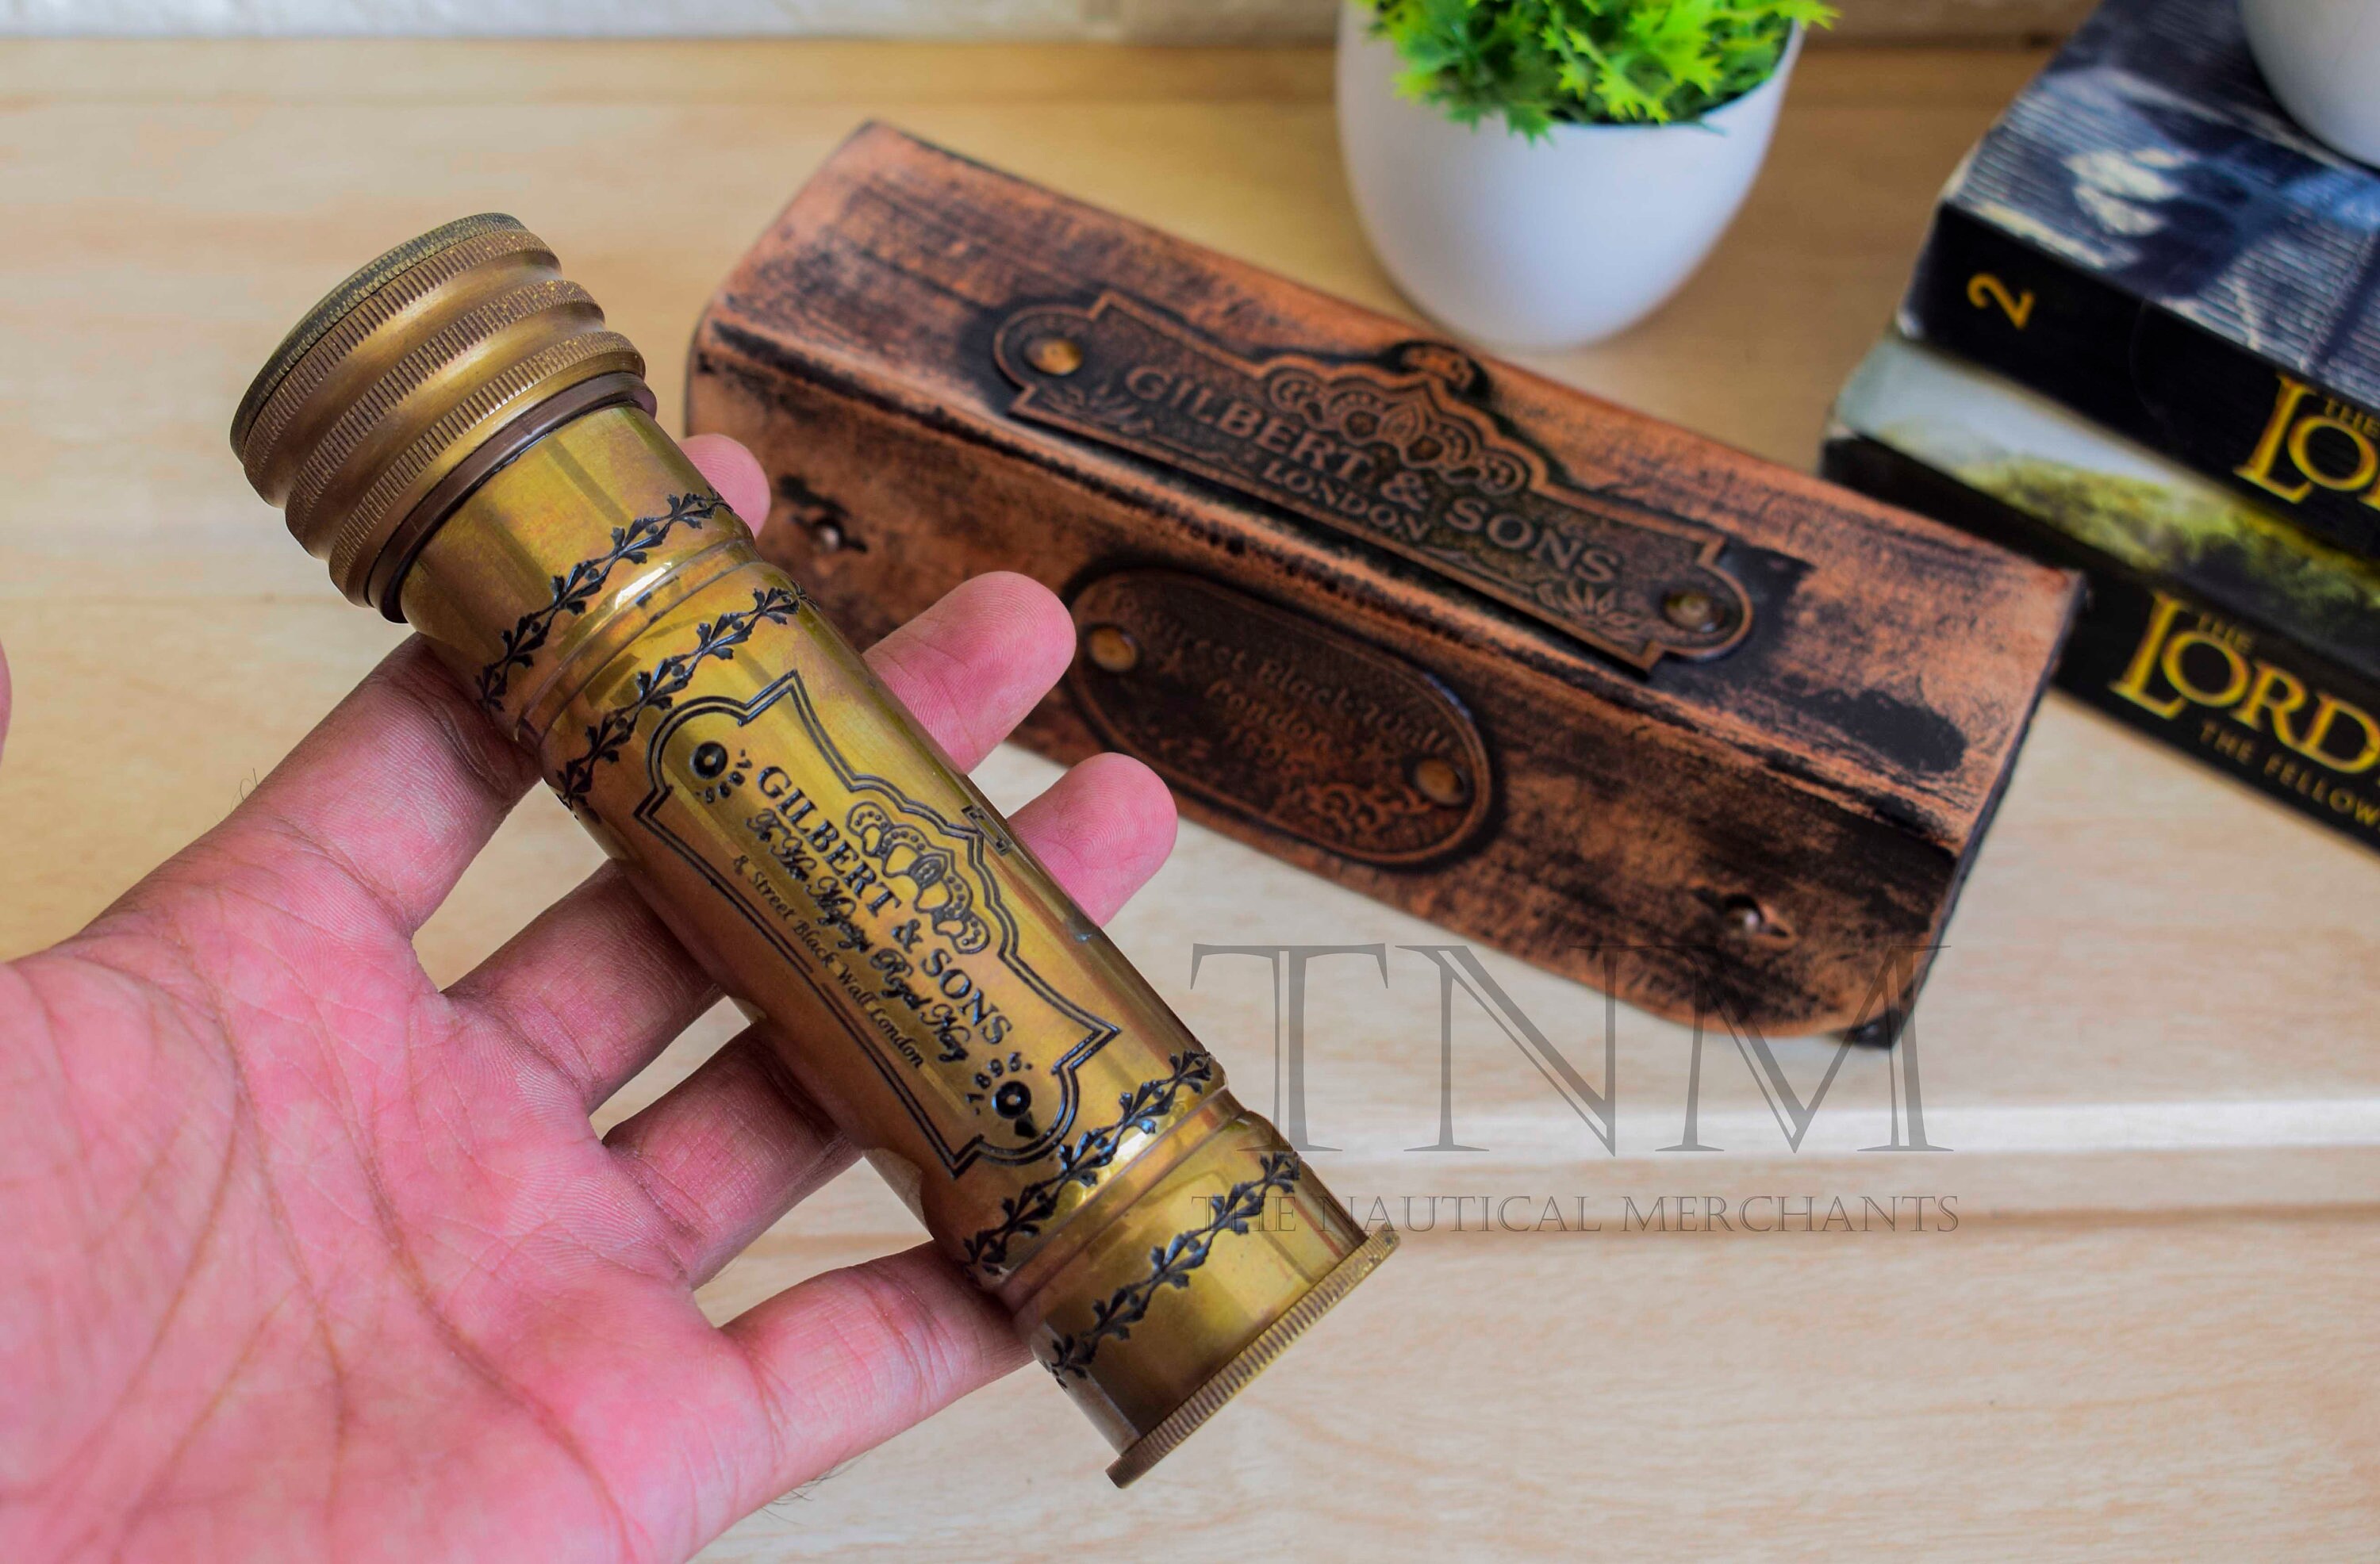 Family Friends Gift Antique Vibes Prism Kaleidoscope in Wooden Box Handmade Brass Vintage Design Gifts for Kids Children Son Daughter Gifts 